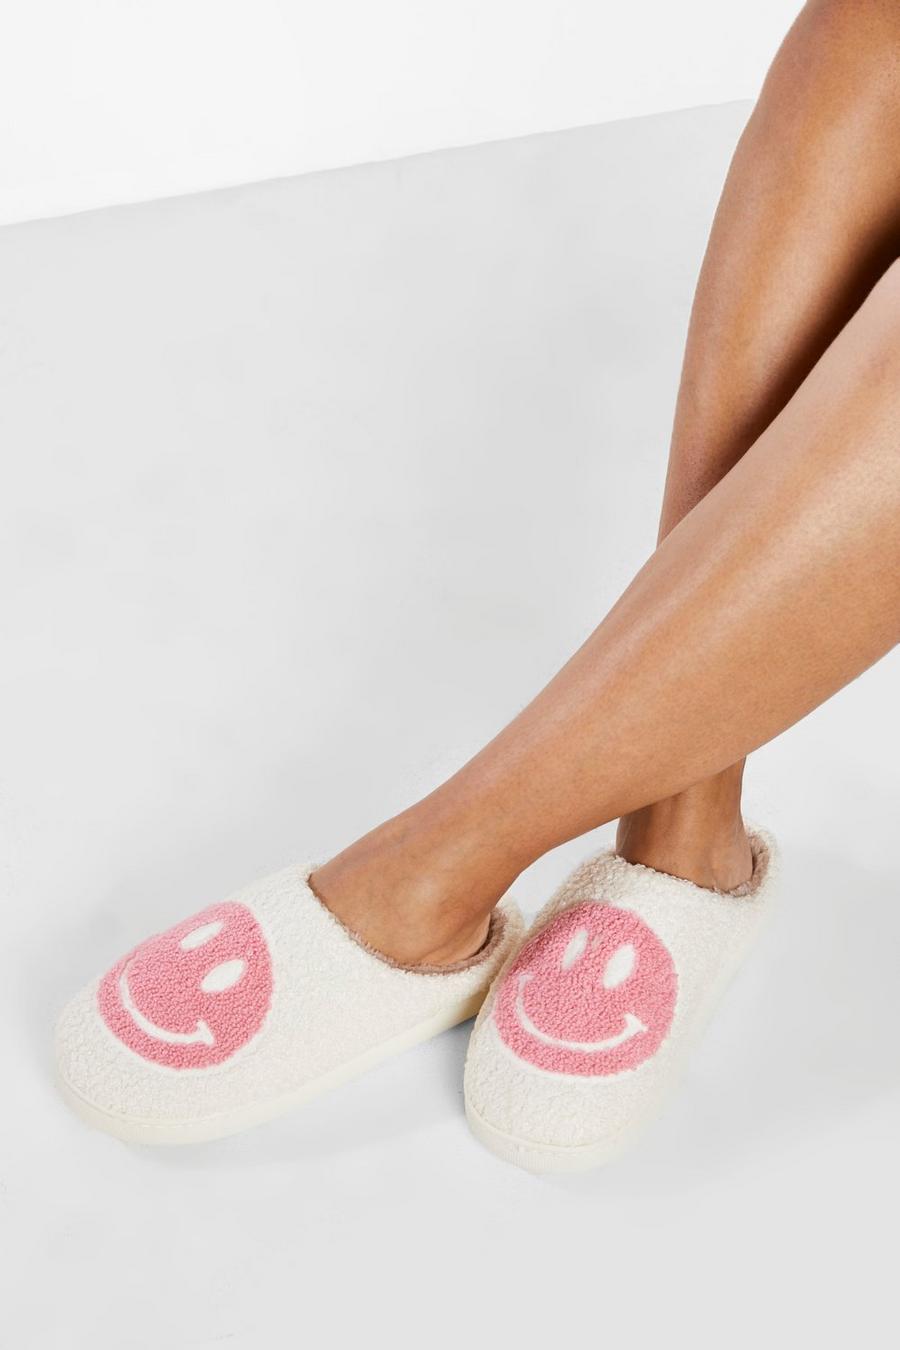 Slippers Happy - Chaussons Smiley - Slippers - Chaussons Smiley -  Pantoufles femmes